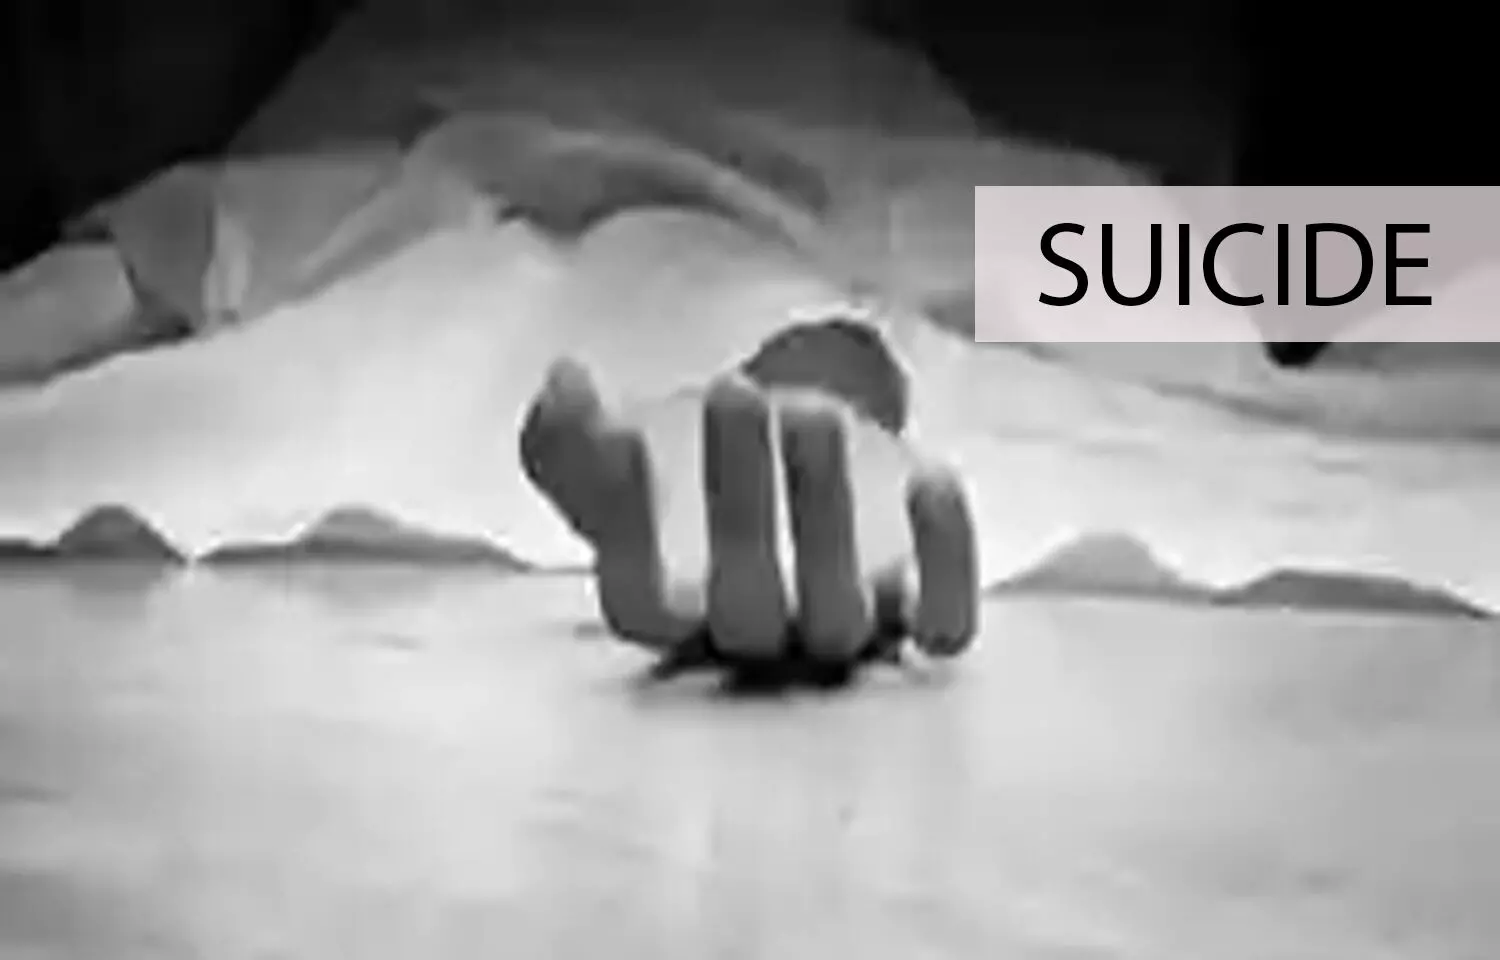 BAMS doctor allegedly commits suicide after killing wife, 2 sons